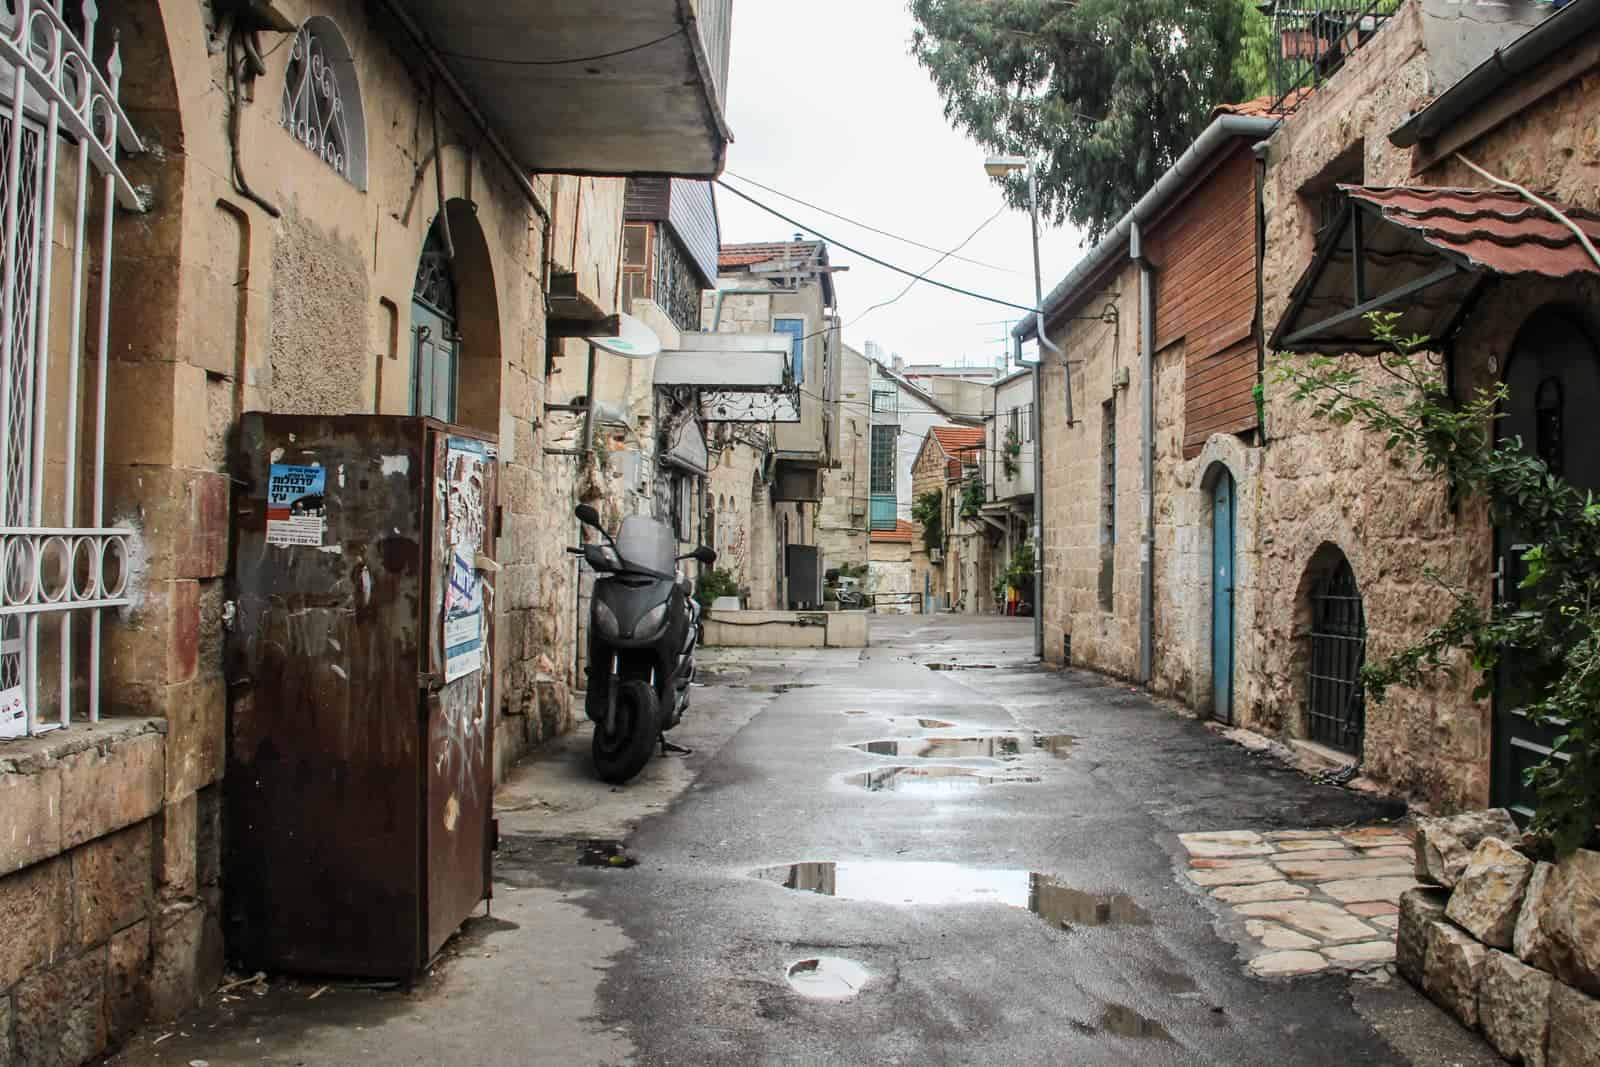 A Jerusalem street of low rise houses built with the local honey stone. A blue door can be seen on the right.